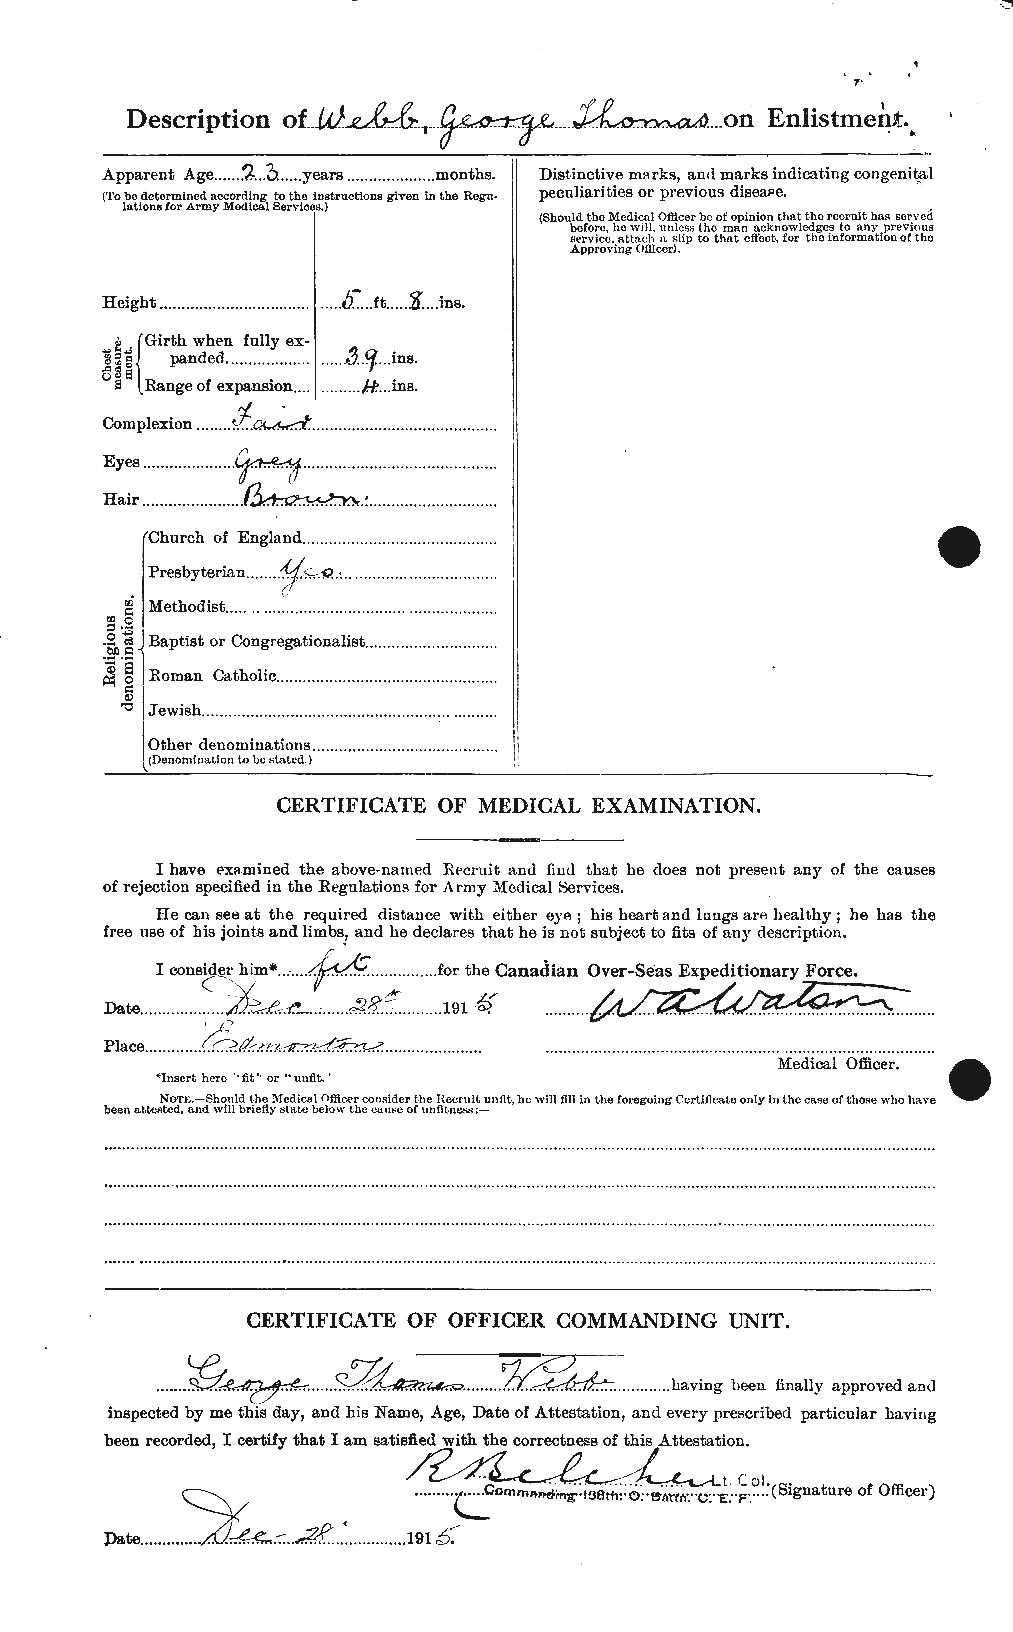 Personnel Records of the First World War - CEF 661853b